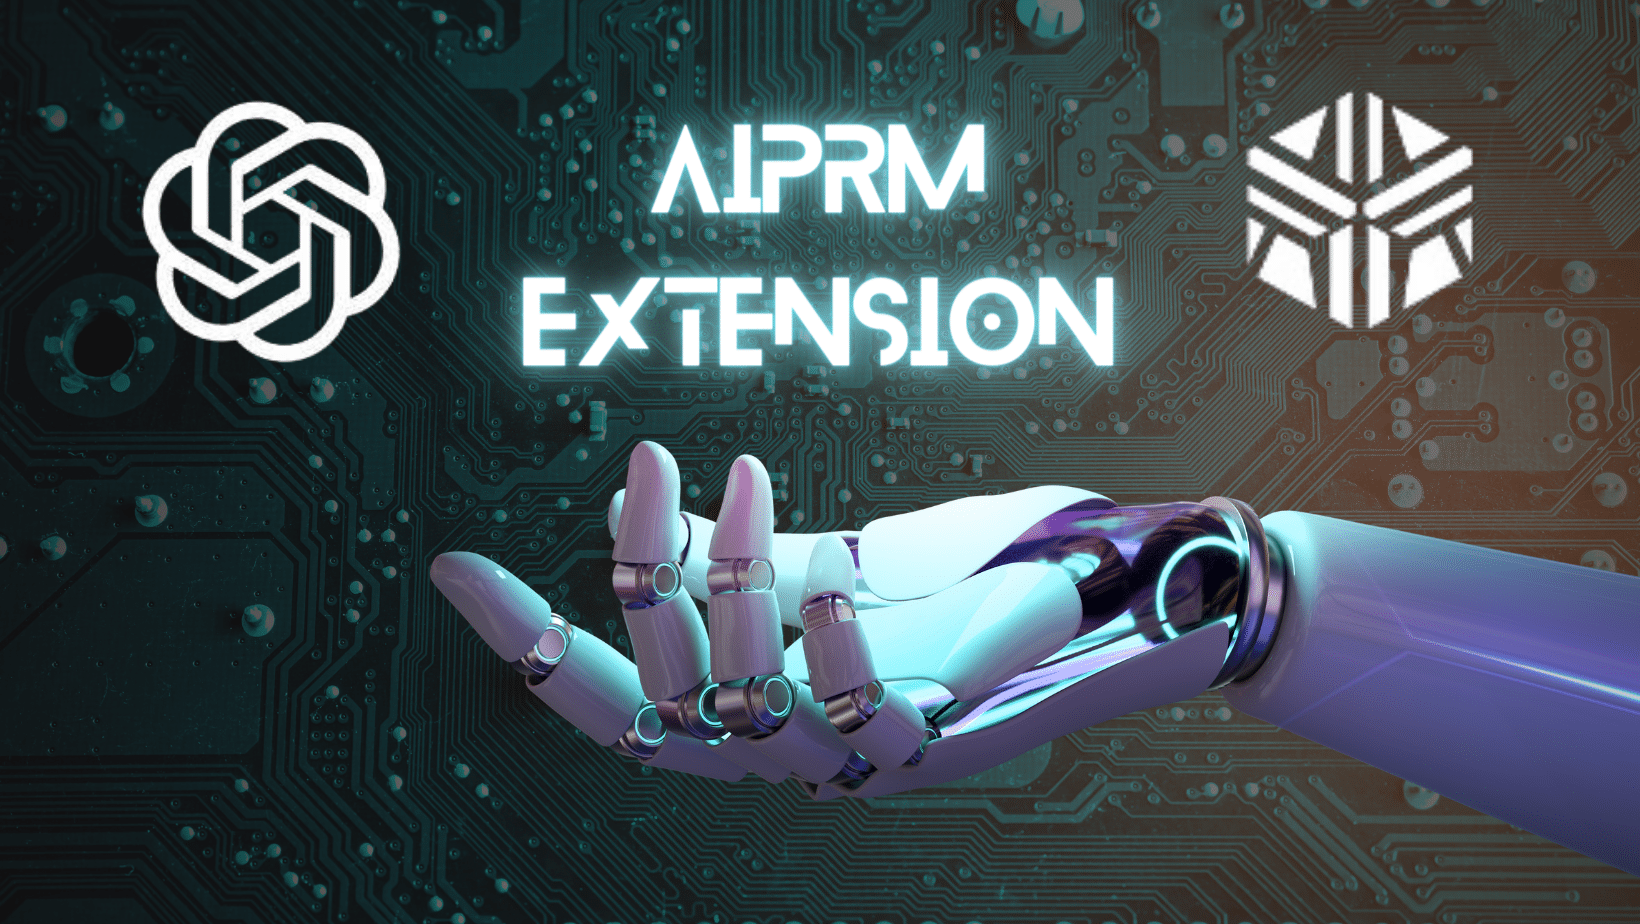 AIPRM Extension for ChatGPT